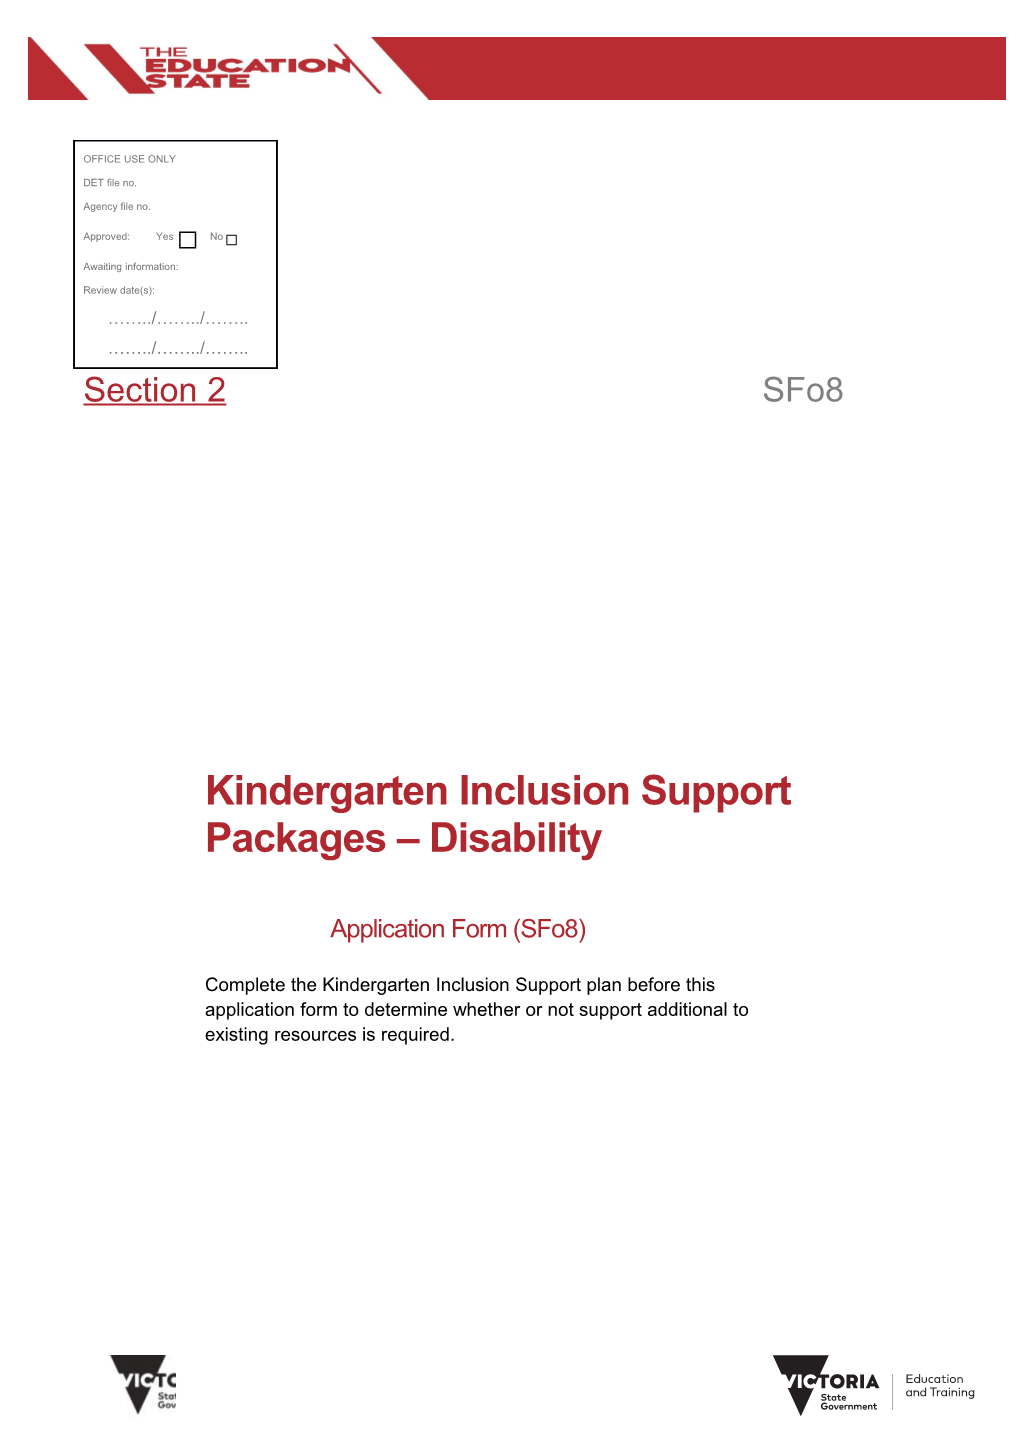 Kindergarten Inclusion Support Packages - Disability Application Form